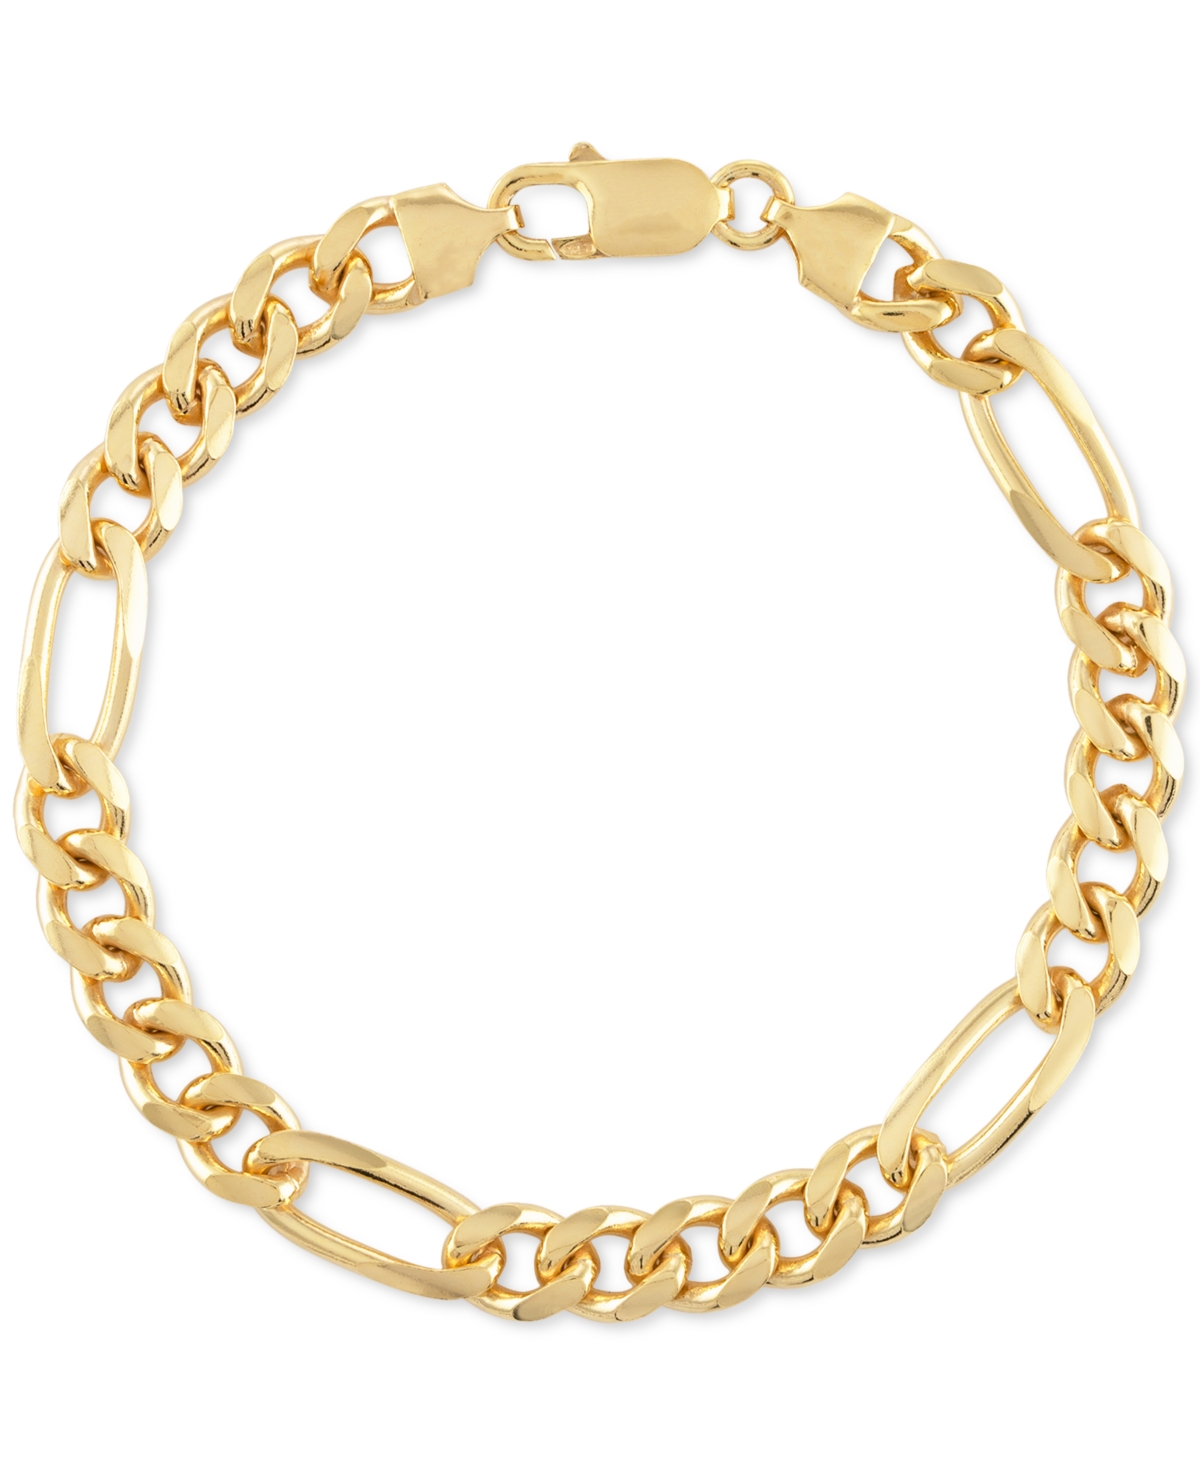 Cuban Figaro Link Bracelet, Created for Macy's - Gold Over Silver